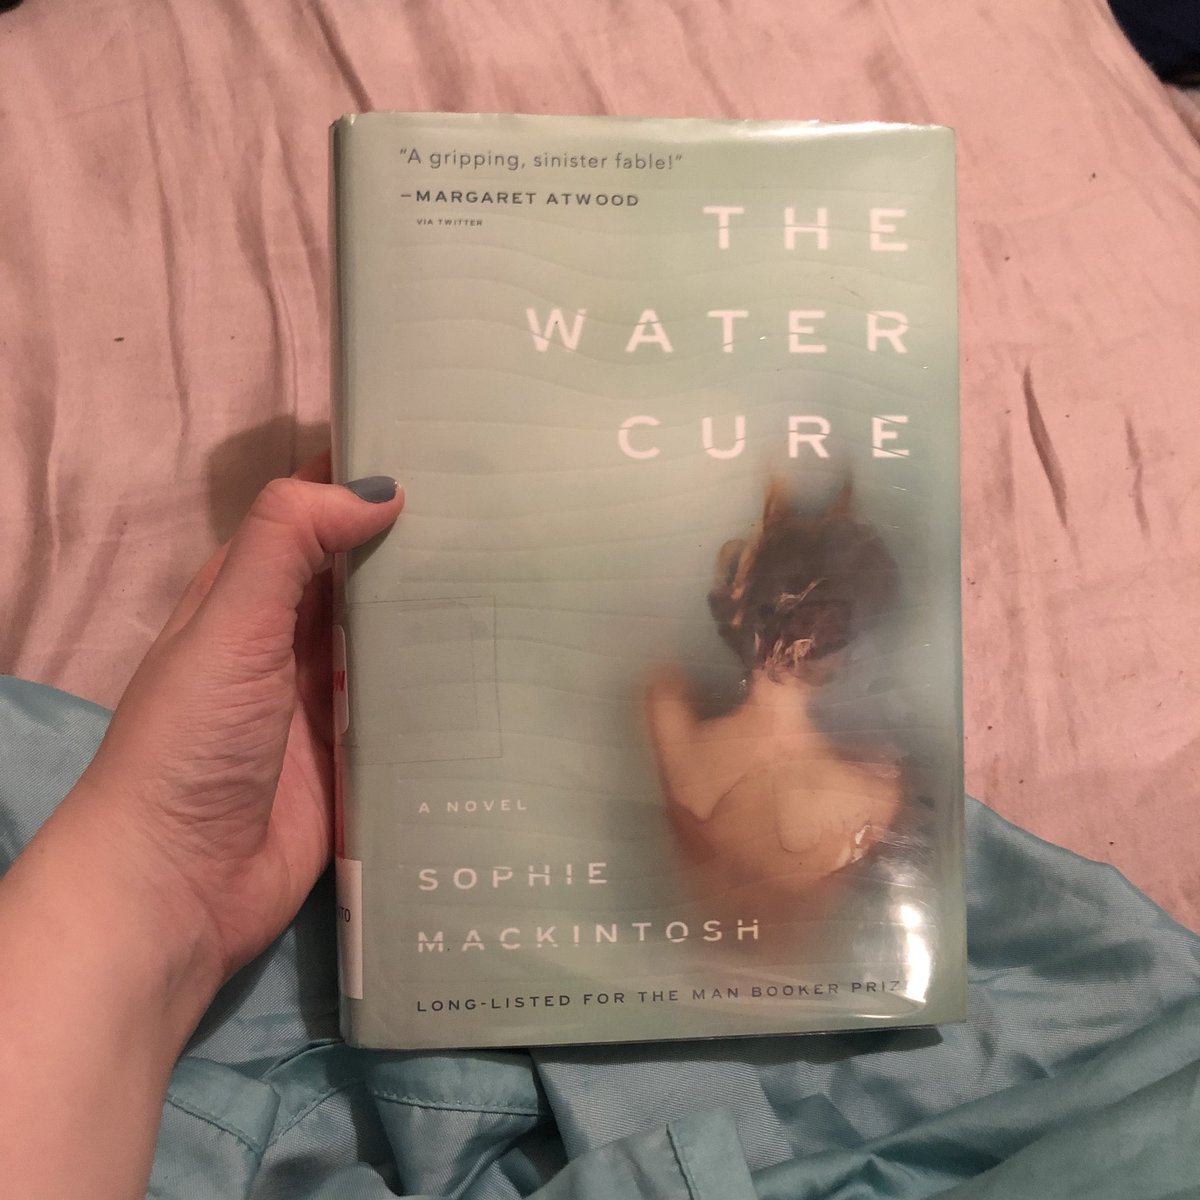 15. The Water Cure - Sophie Mackintosh